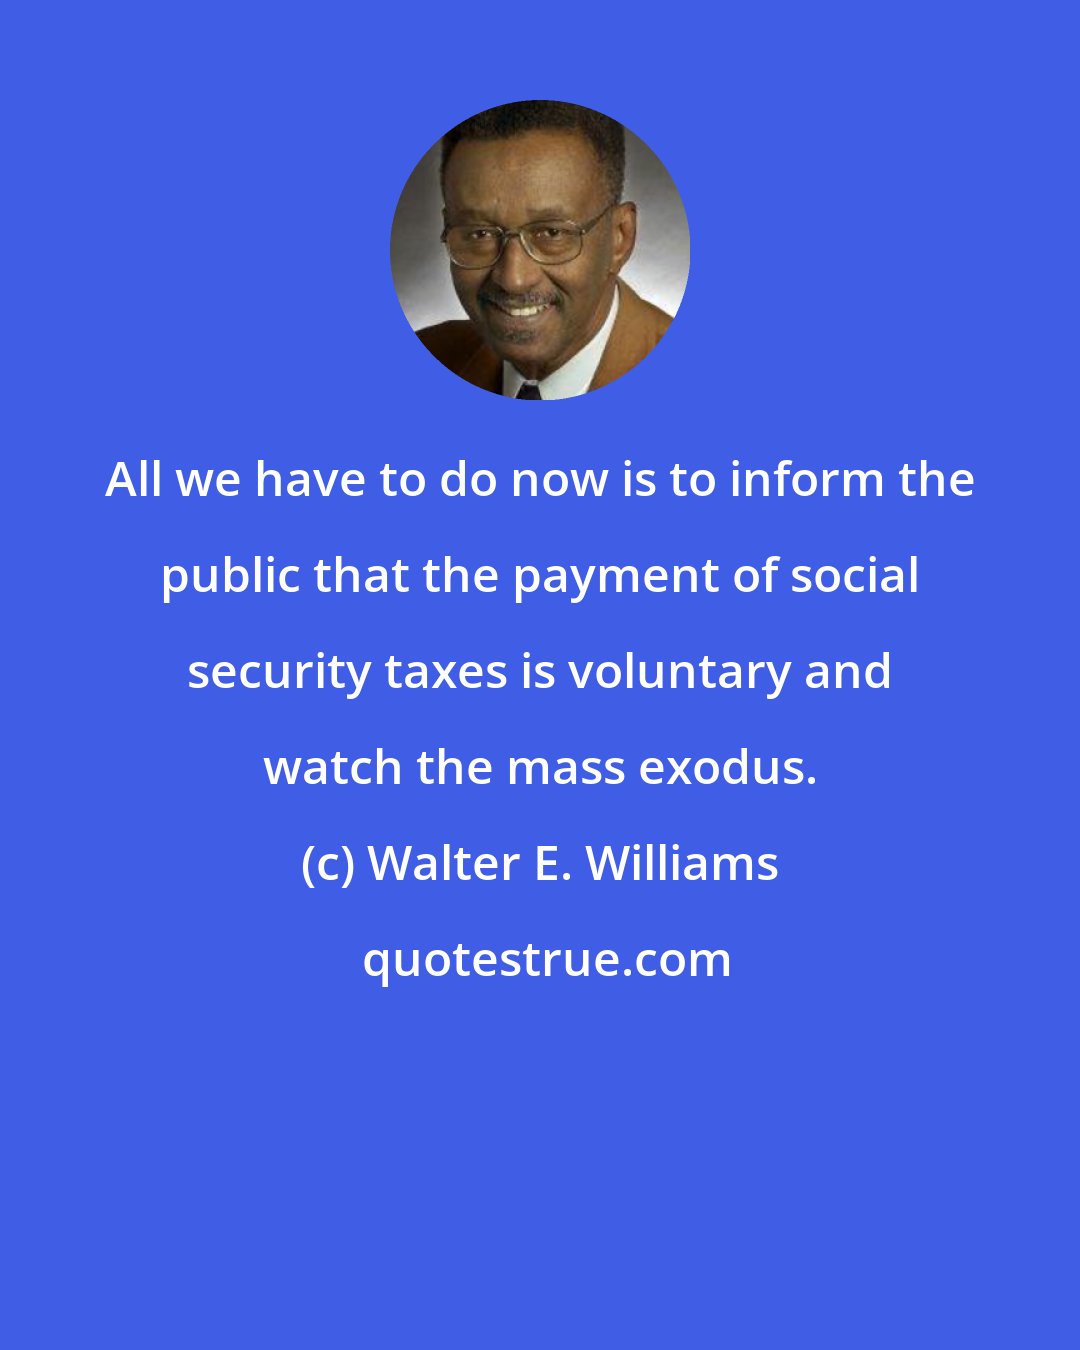 Walter E. Williams: All we have to do now is to inform the public that the payment of social security taxes is voluntary and watch the mass exodus.